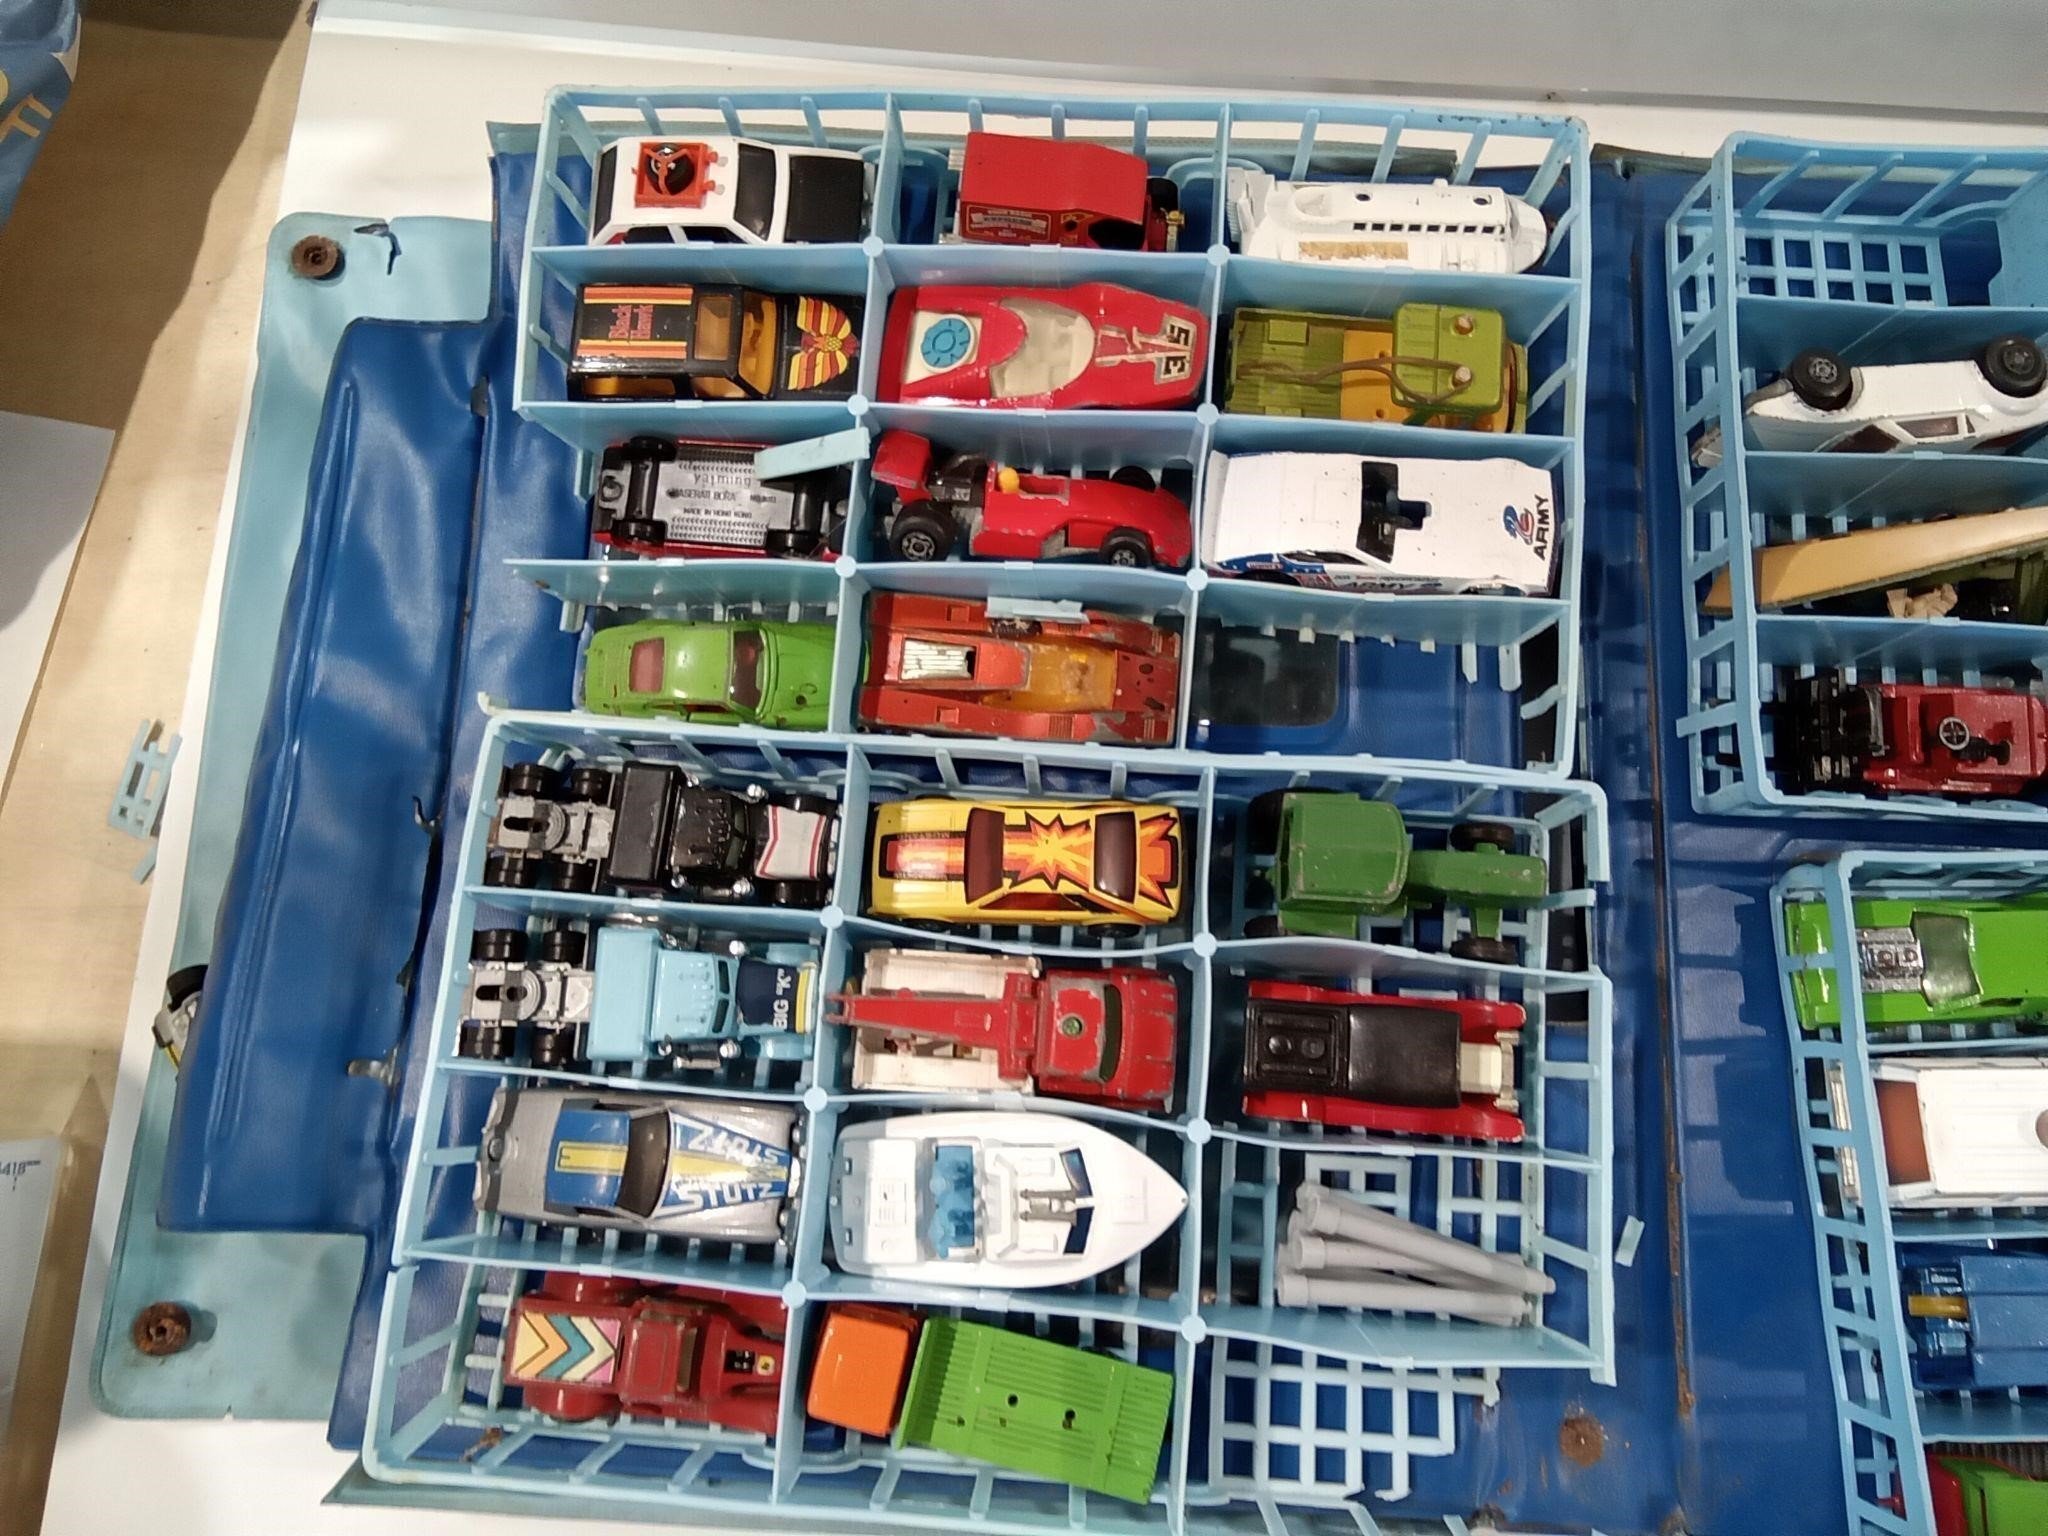 Over Seventy Die Cast Vehicles with Case